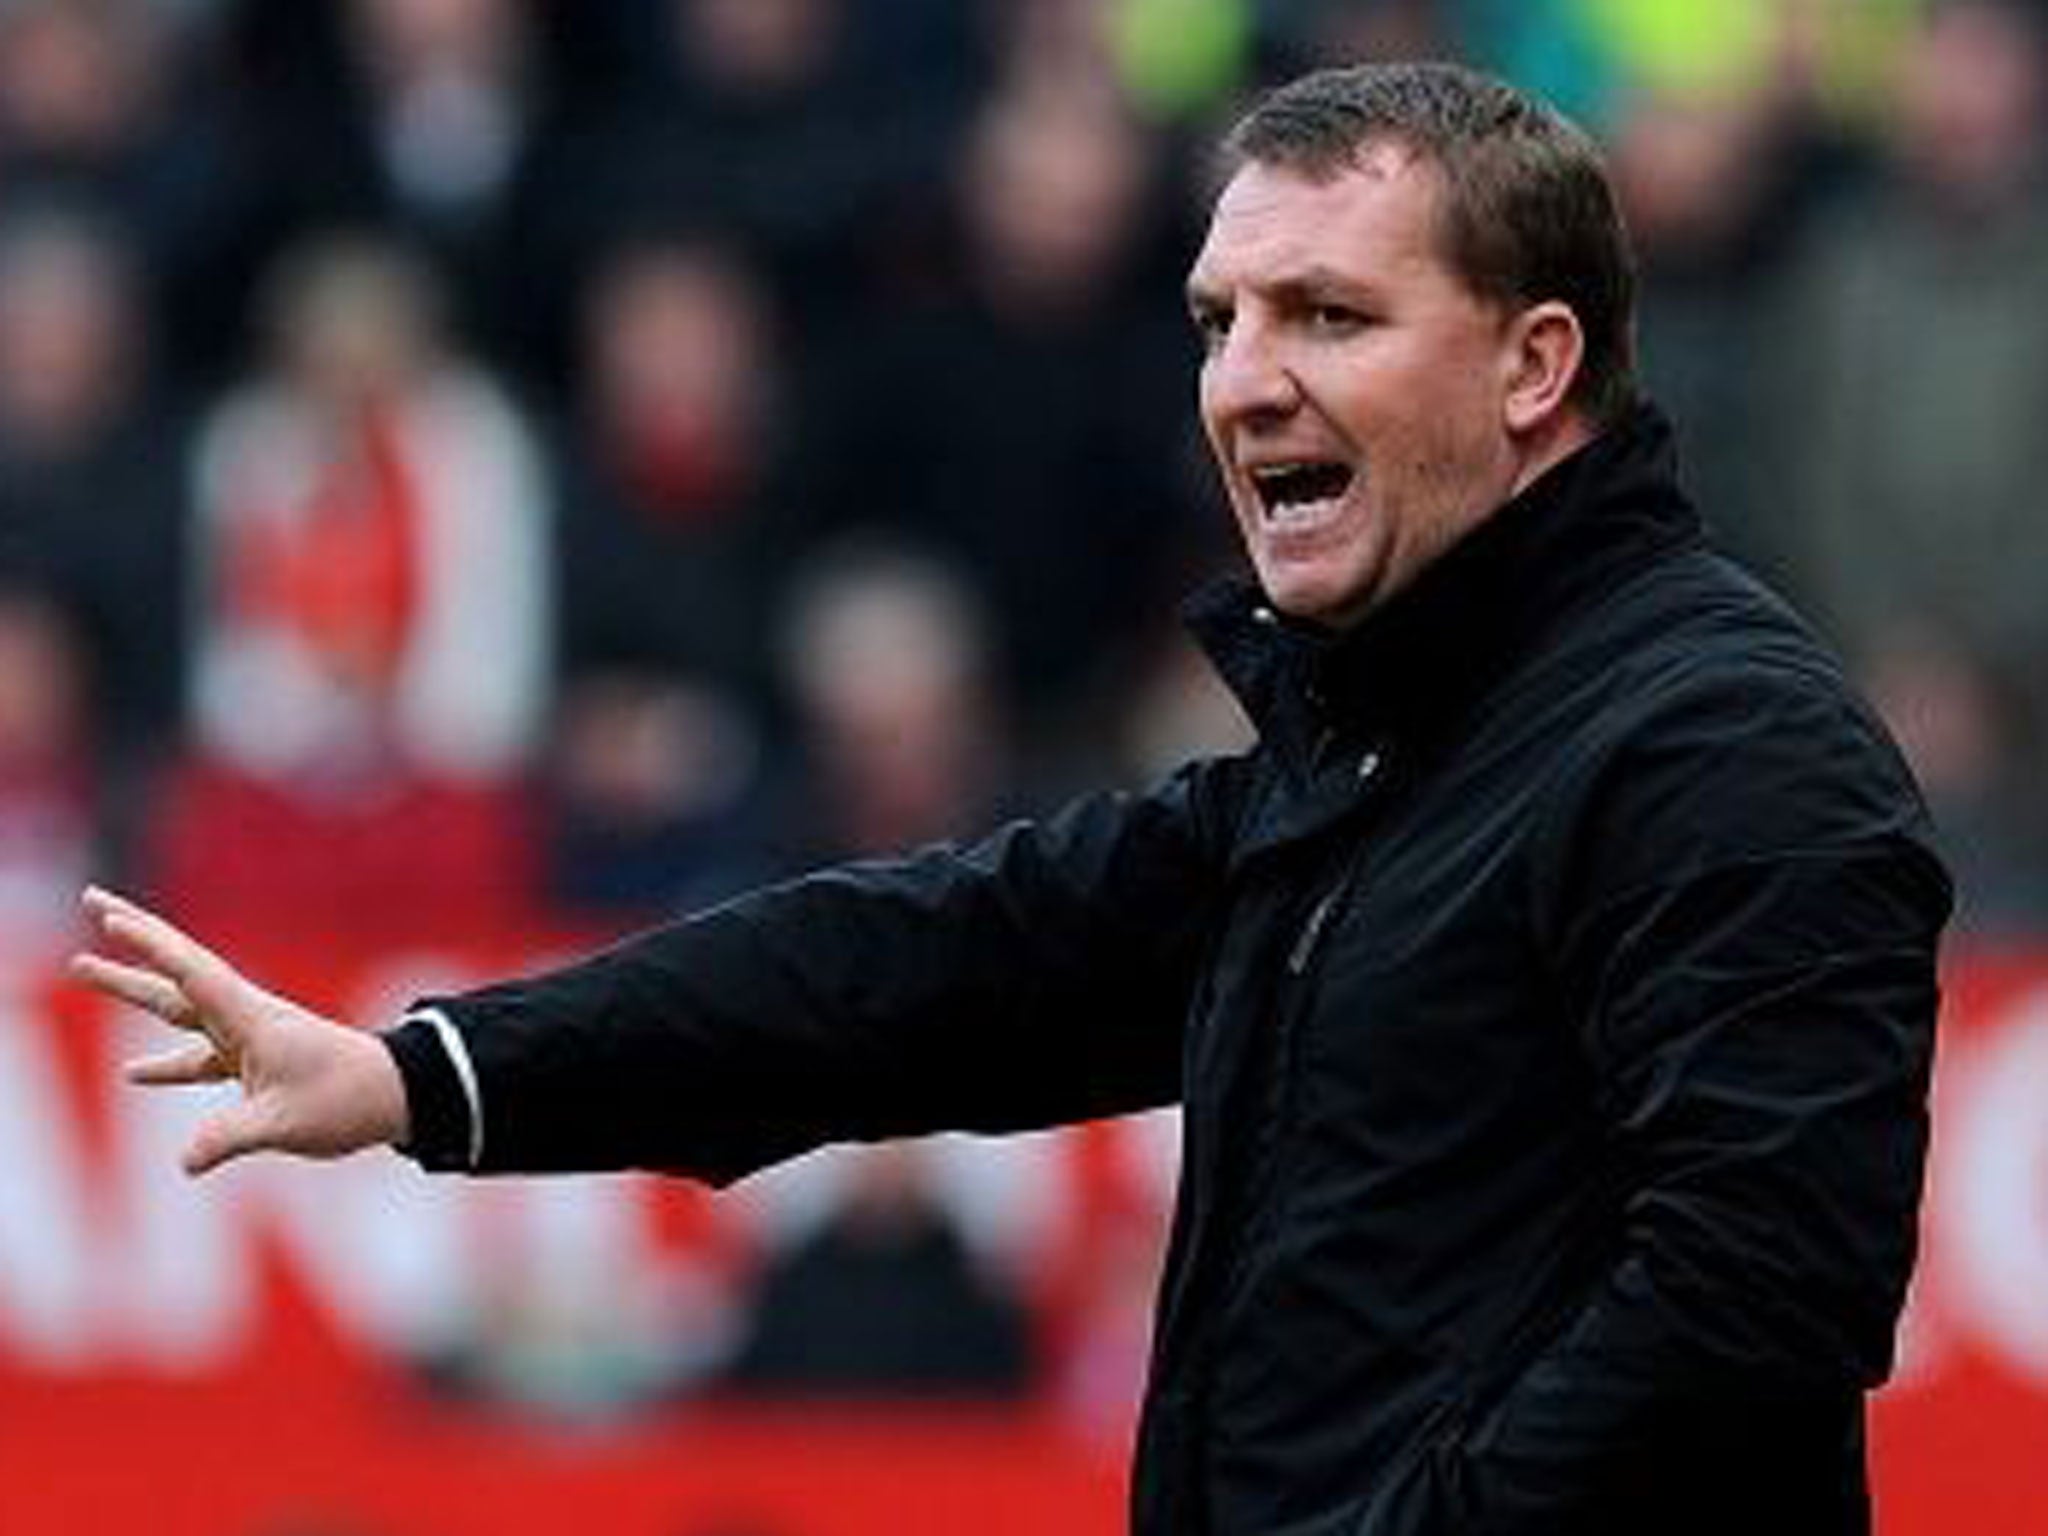 Liverpool manager Brendan Rodgers has said an elusive first win against a top 10 side could help his Liverpool team turn the corner